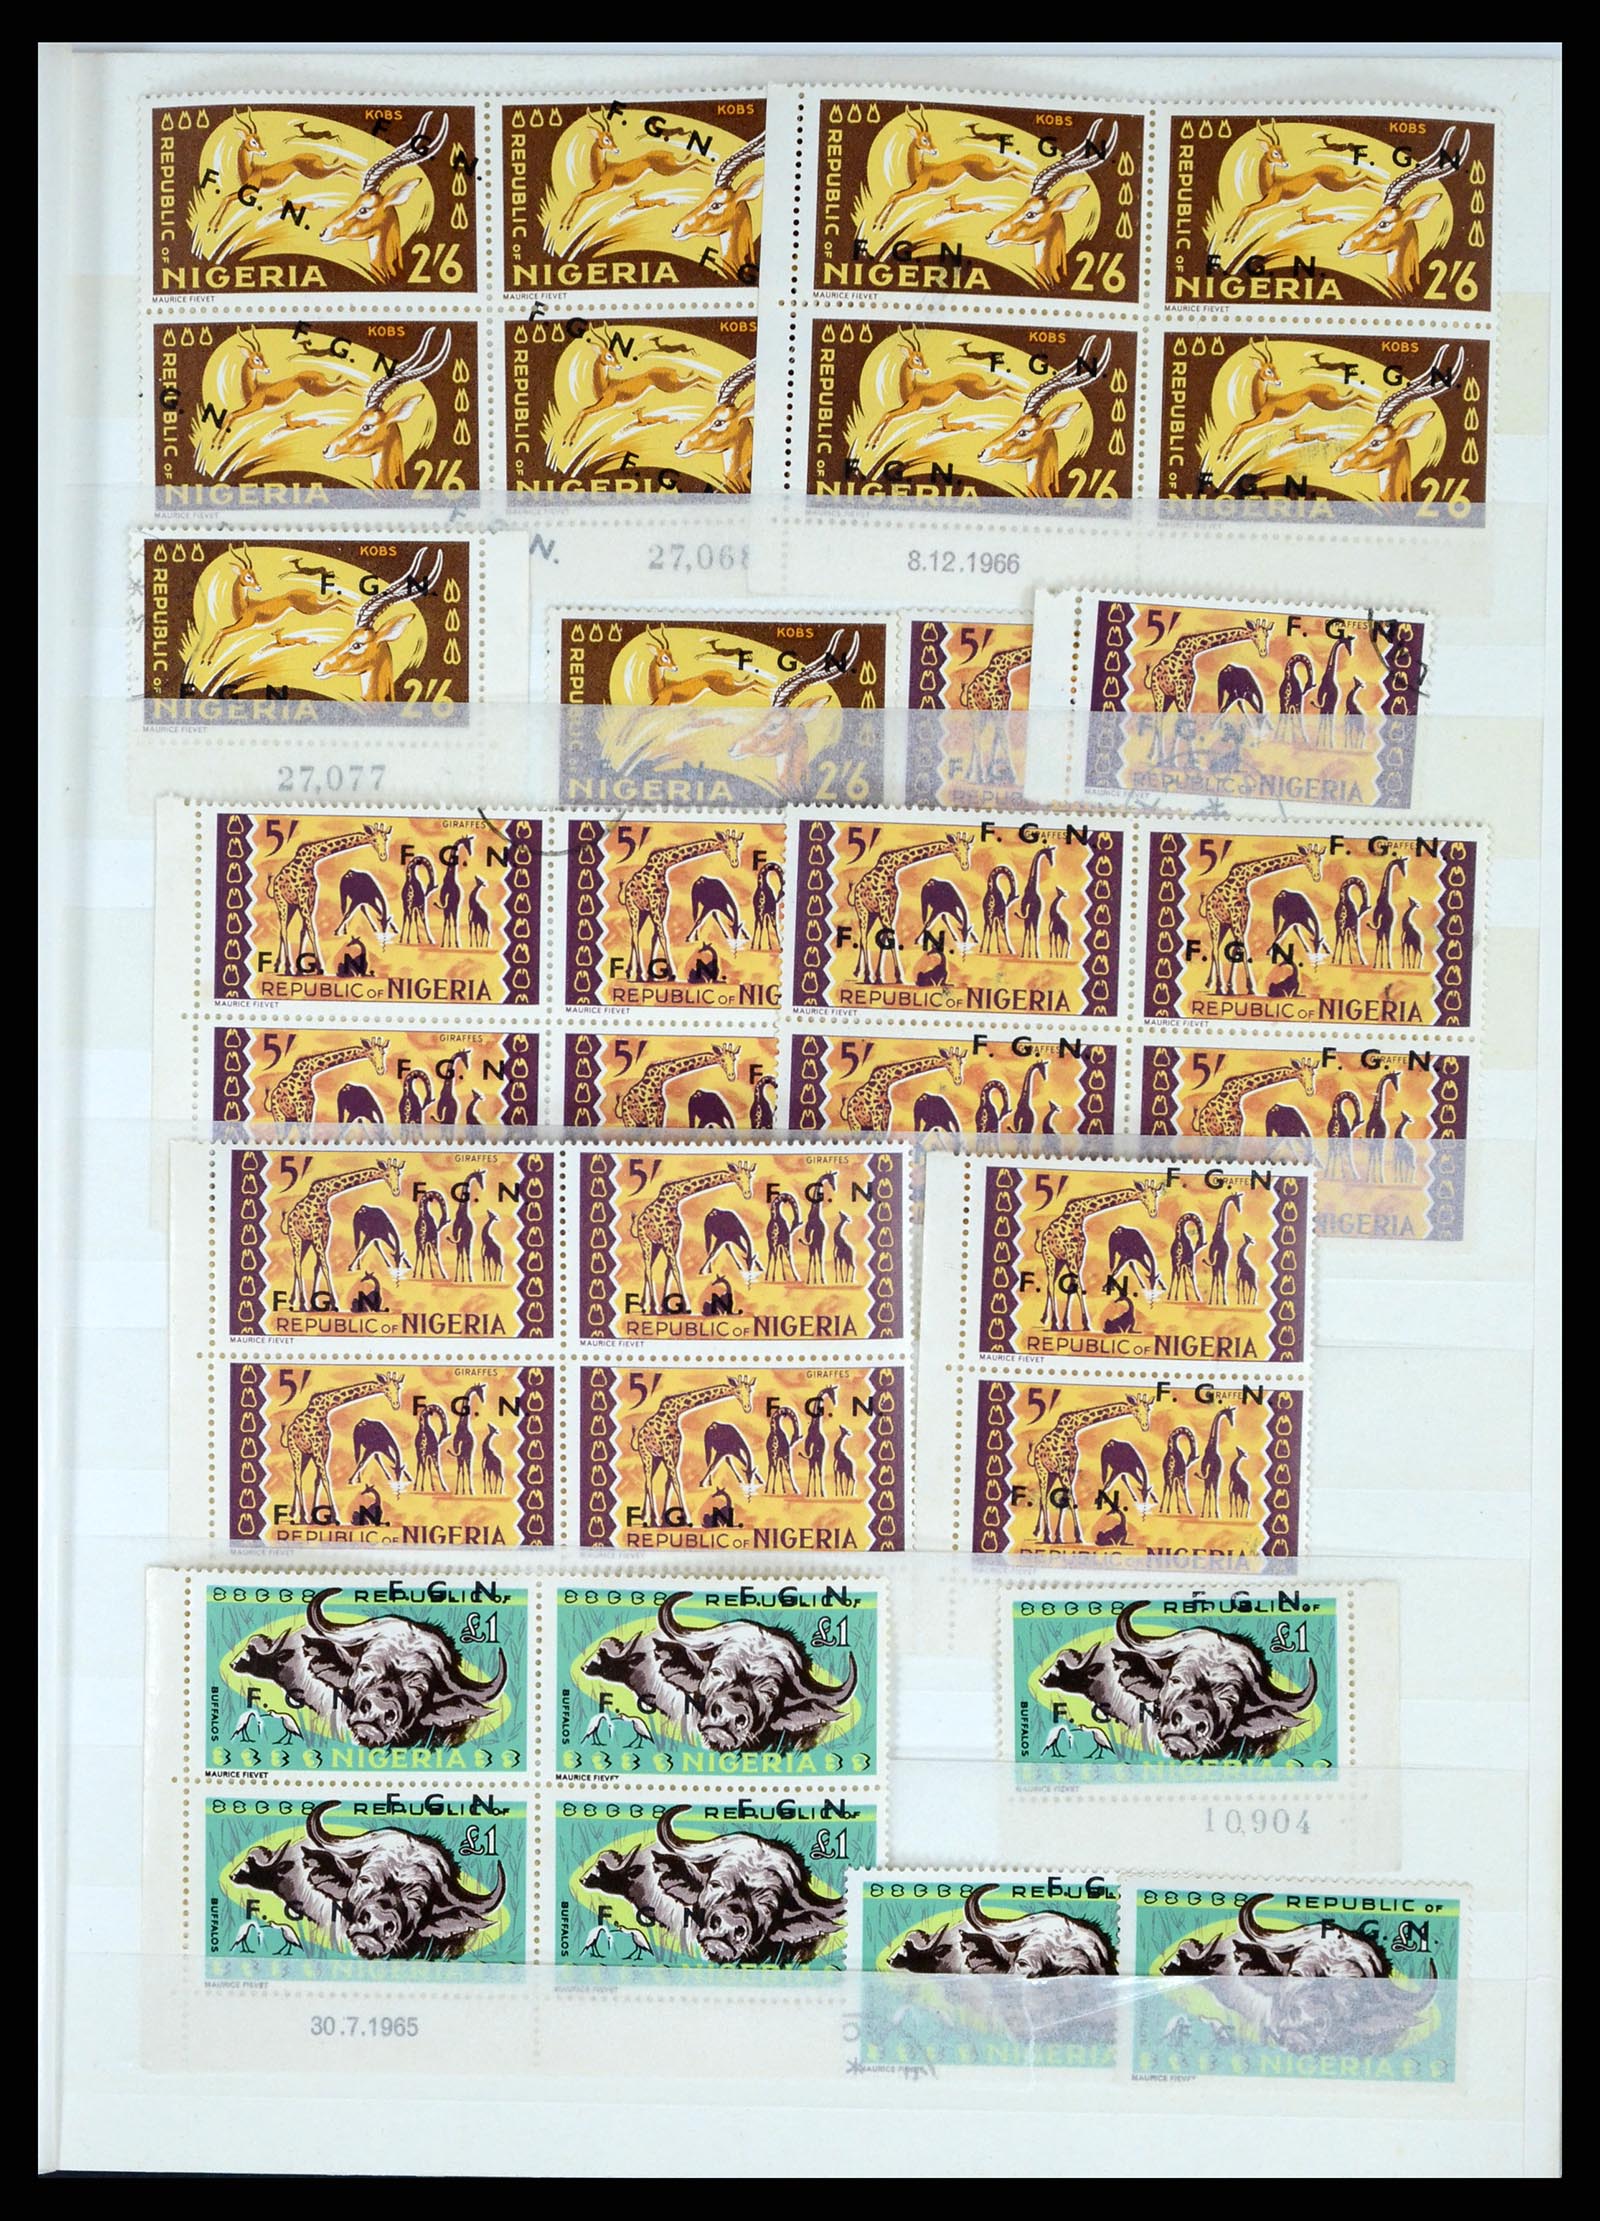 37678 007 - Stamp collection 37678 Nigeria FGN 1968.